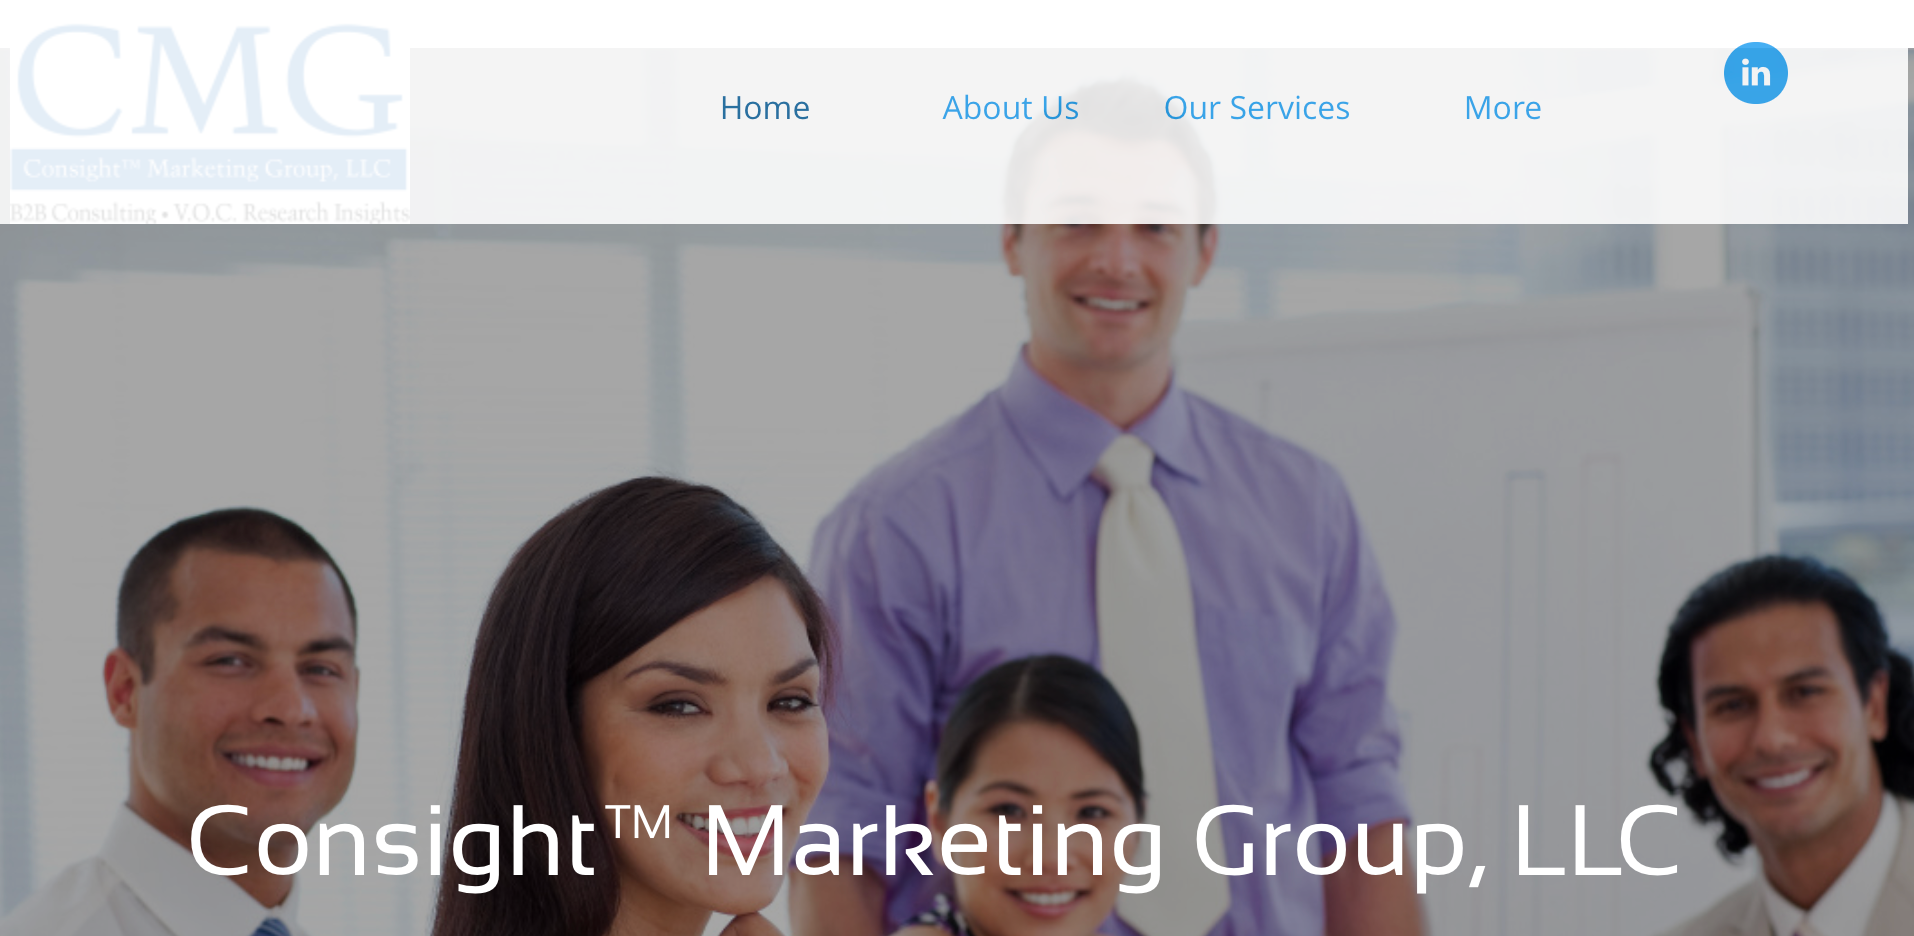 Consight Marketing Group LLC market research company